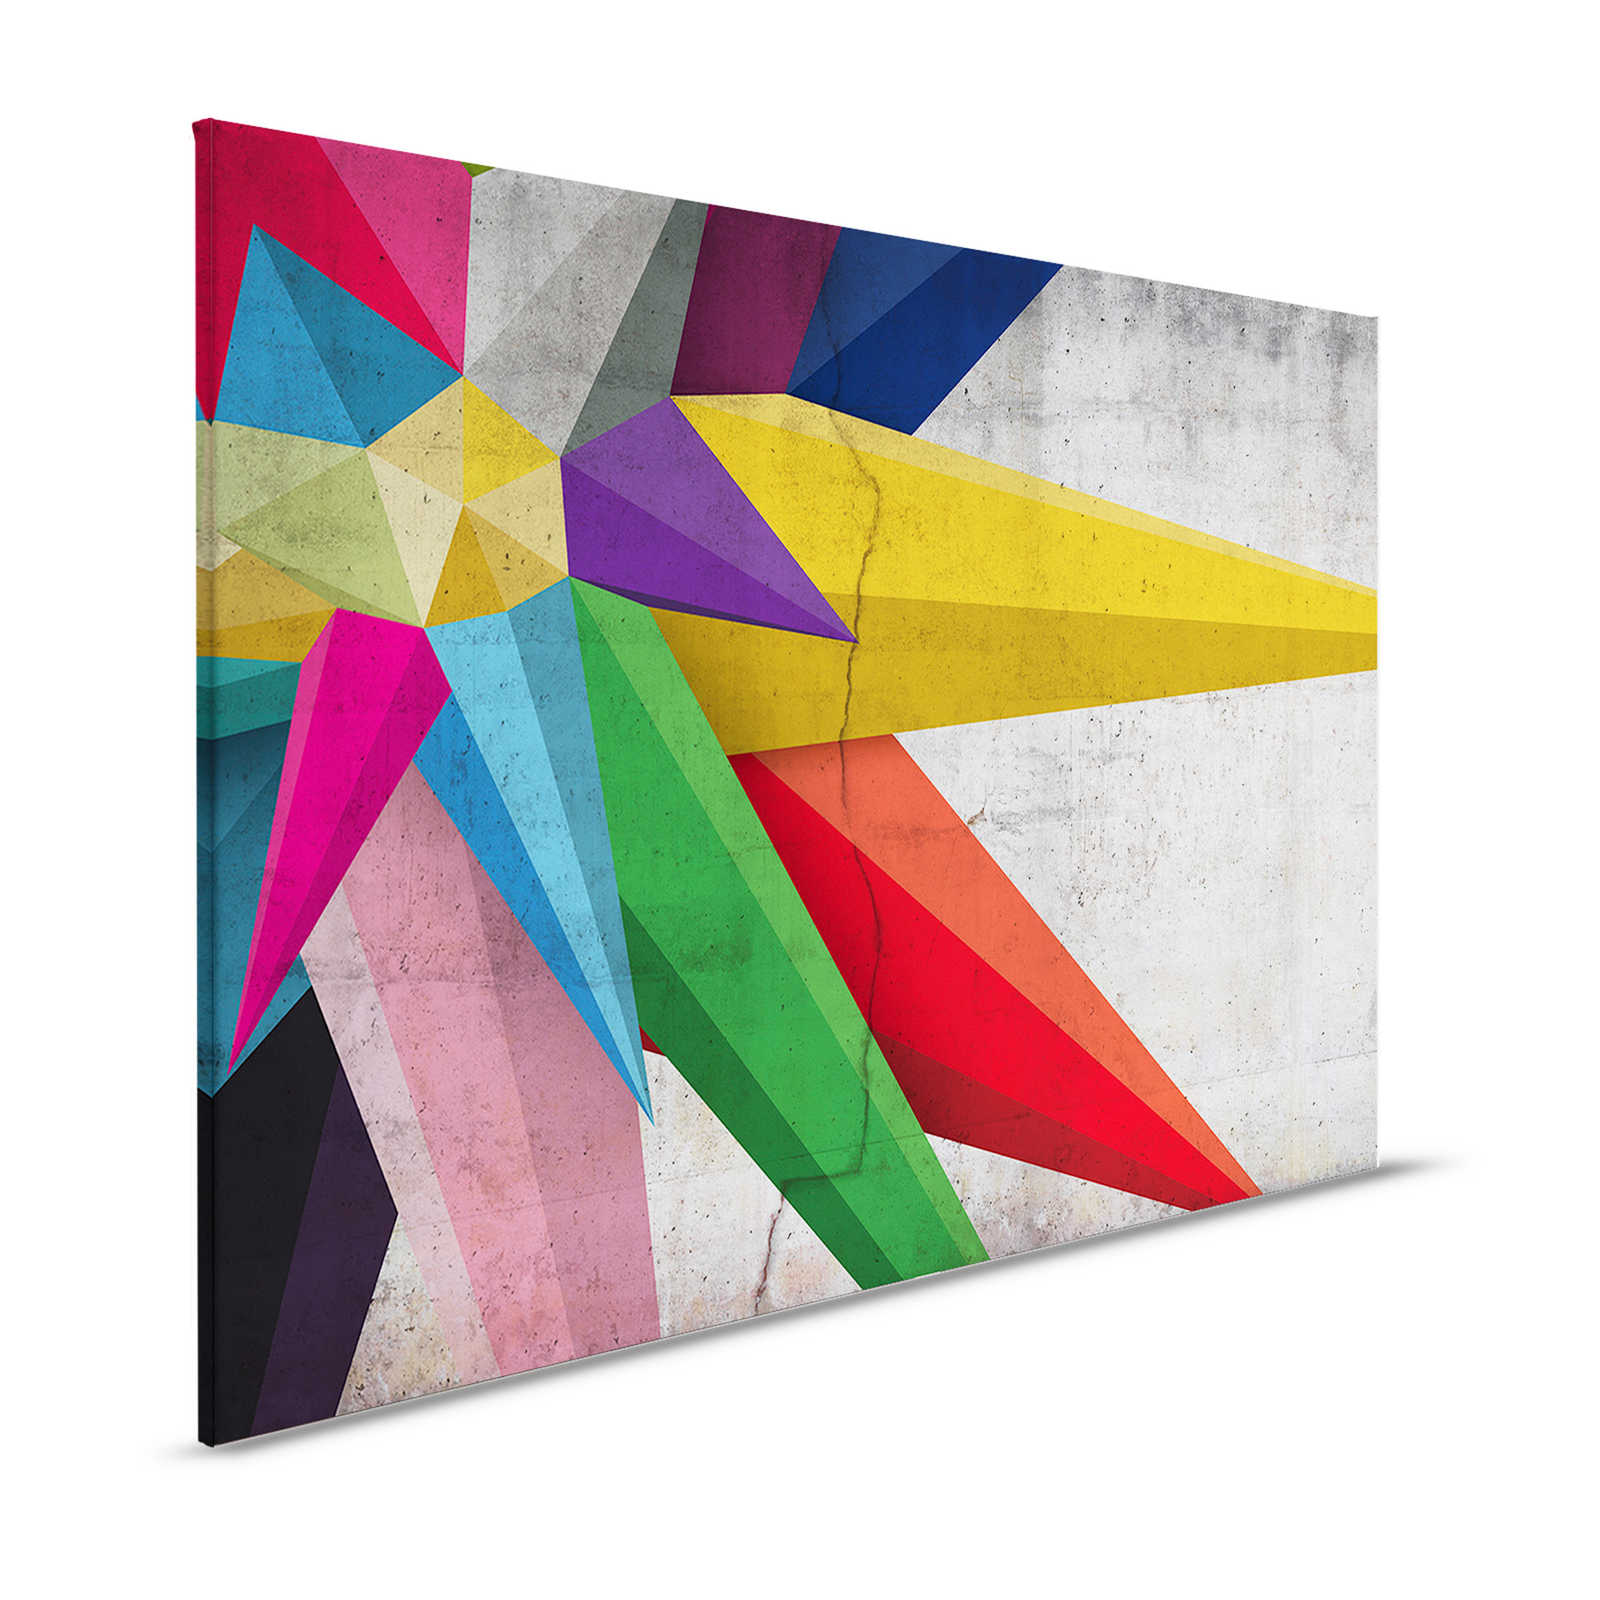 Concrete Canvas Painting with Polygon Style Star Graphic - 1.20 m x 0.80 m
